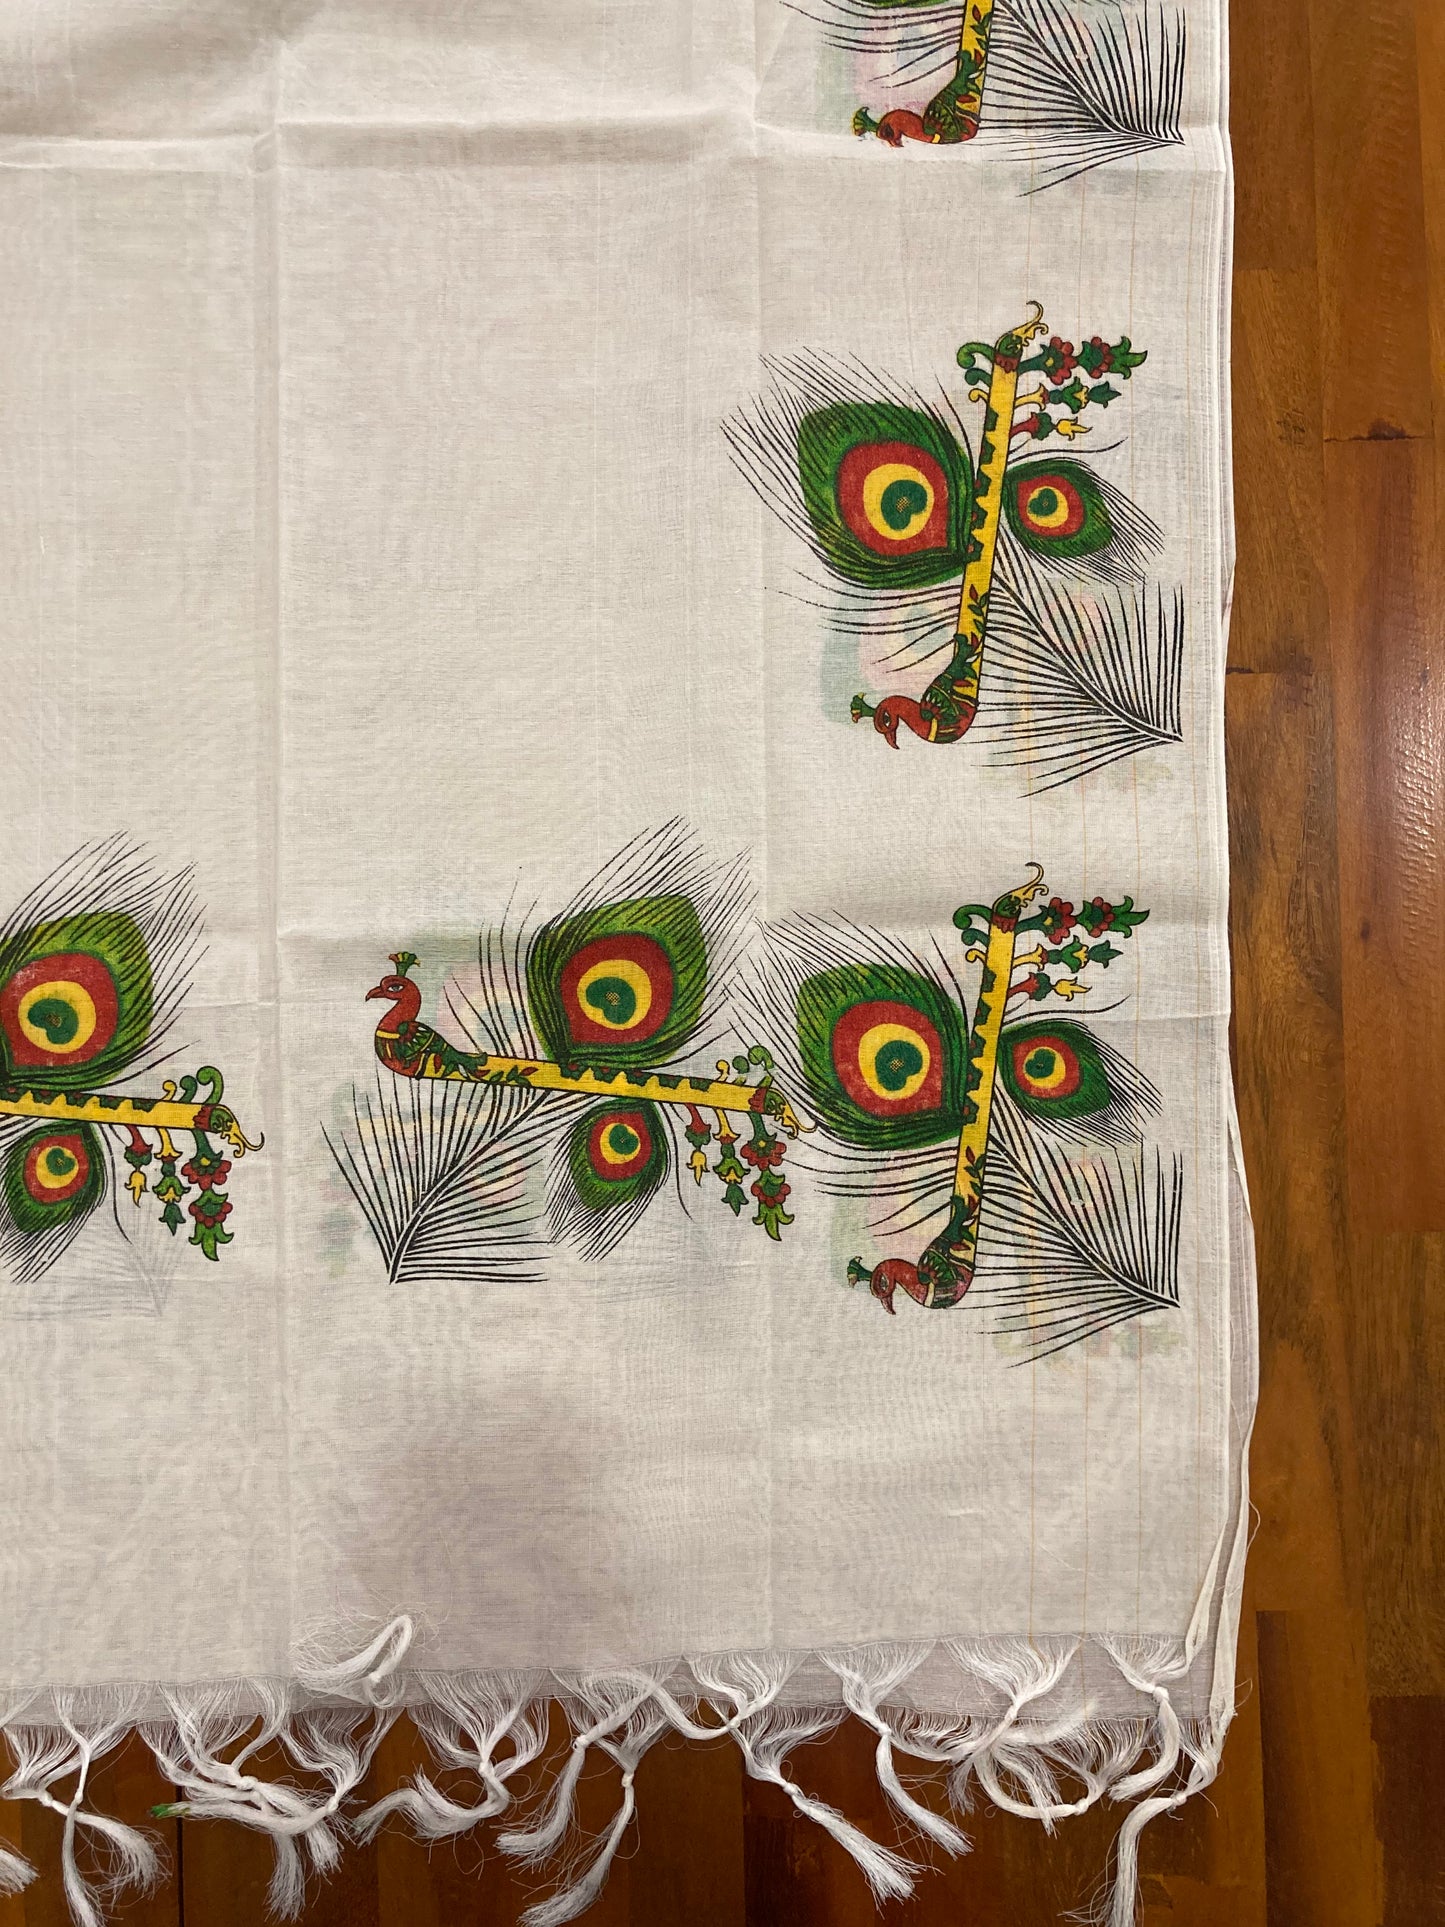 Kerala Cotton Churidar Salwar Material with Mural Printed Peacock Feather and Flute Design (include Striped Shawl / Dupatta)